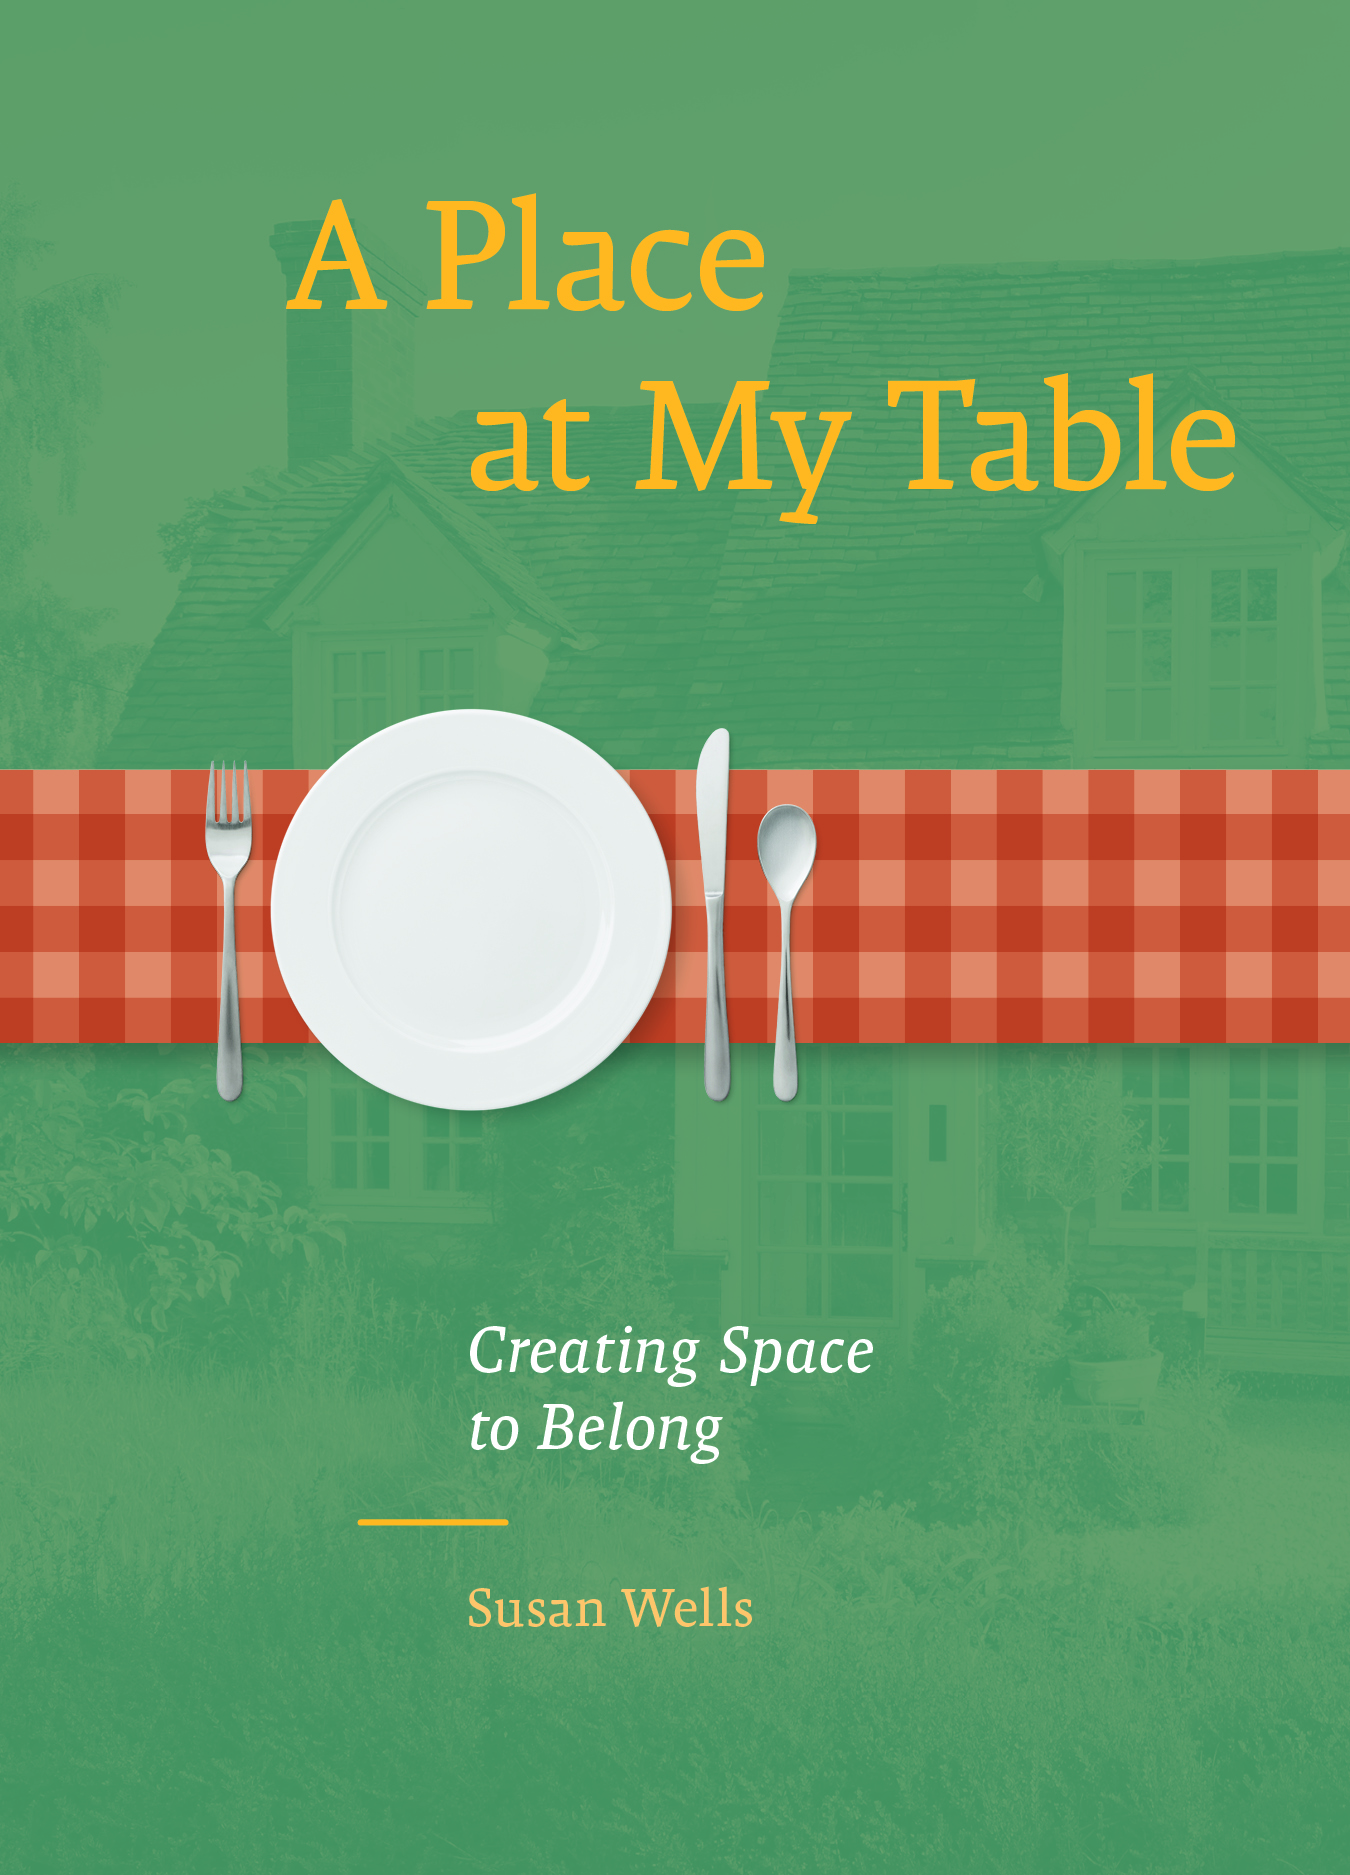 Book cover of A Place at My Table.